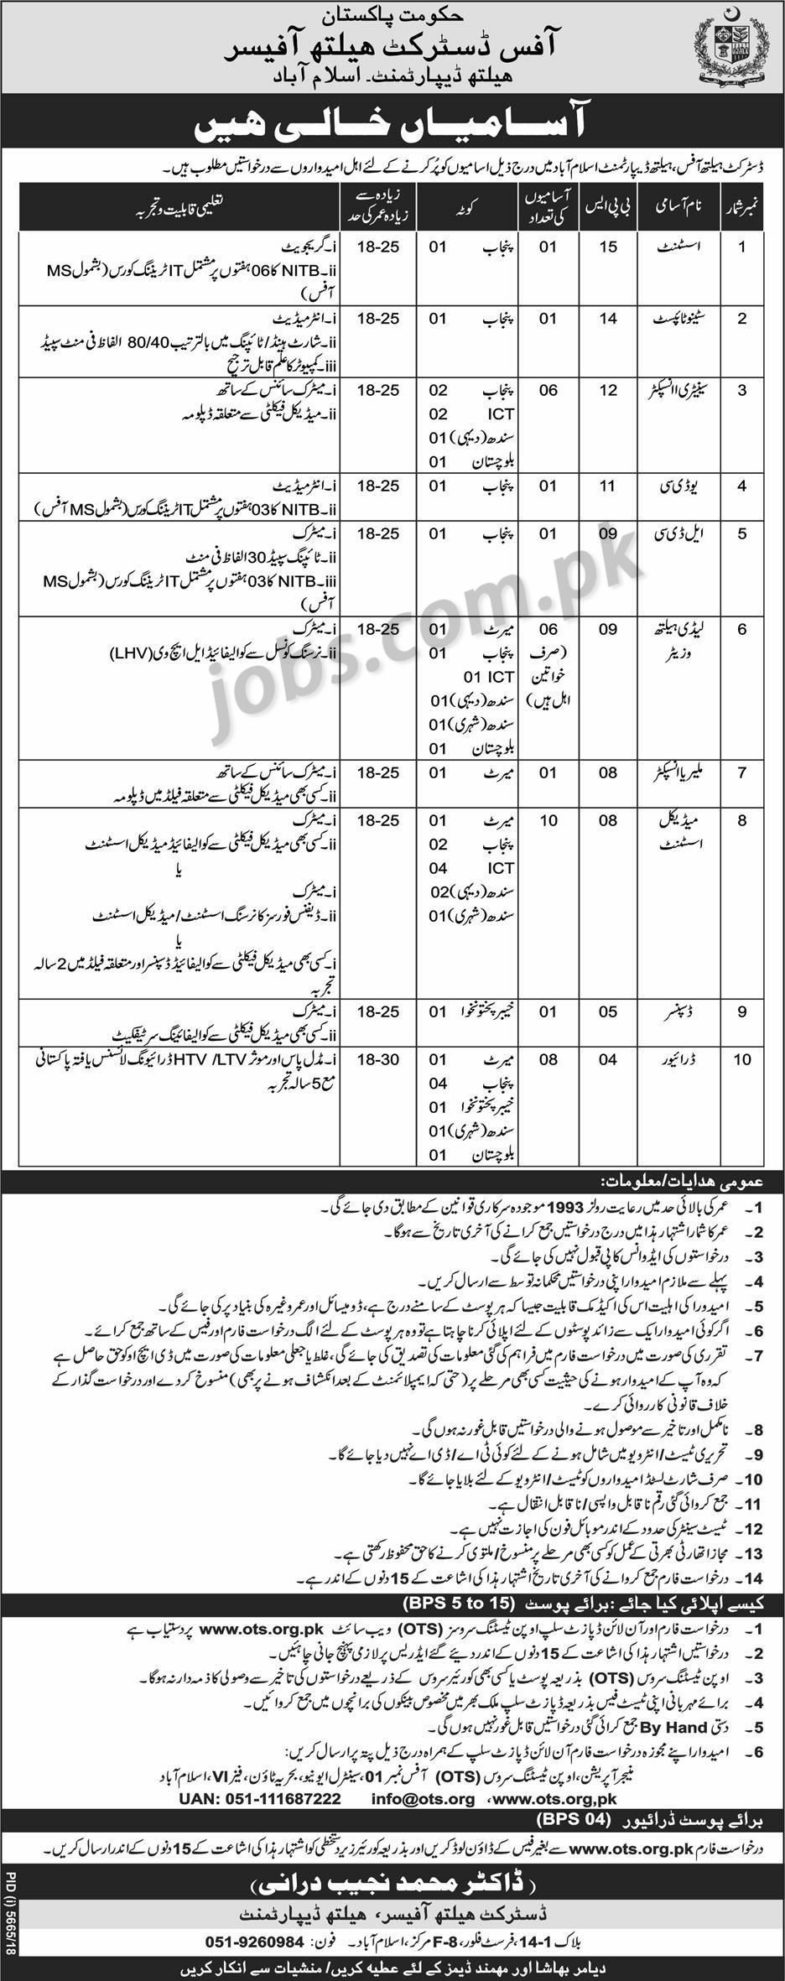 Islamabad District Health Officer Jobs 2019 for 34+ Sanitary Inspectors, LHVs, Assistant, Stenotypist & Other Posts (Download OTS Form)